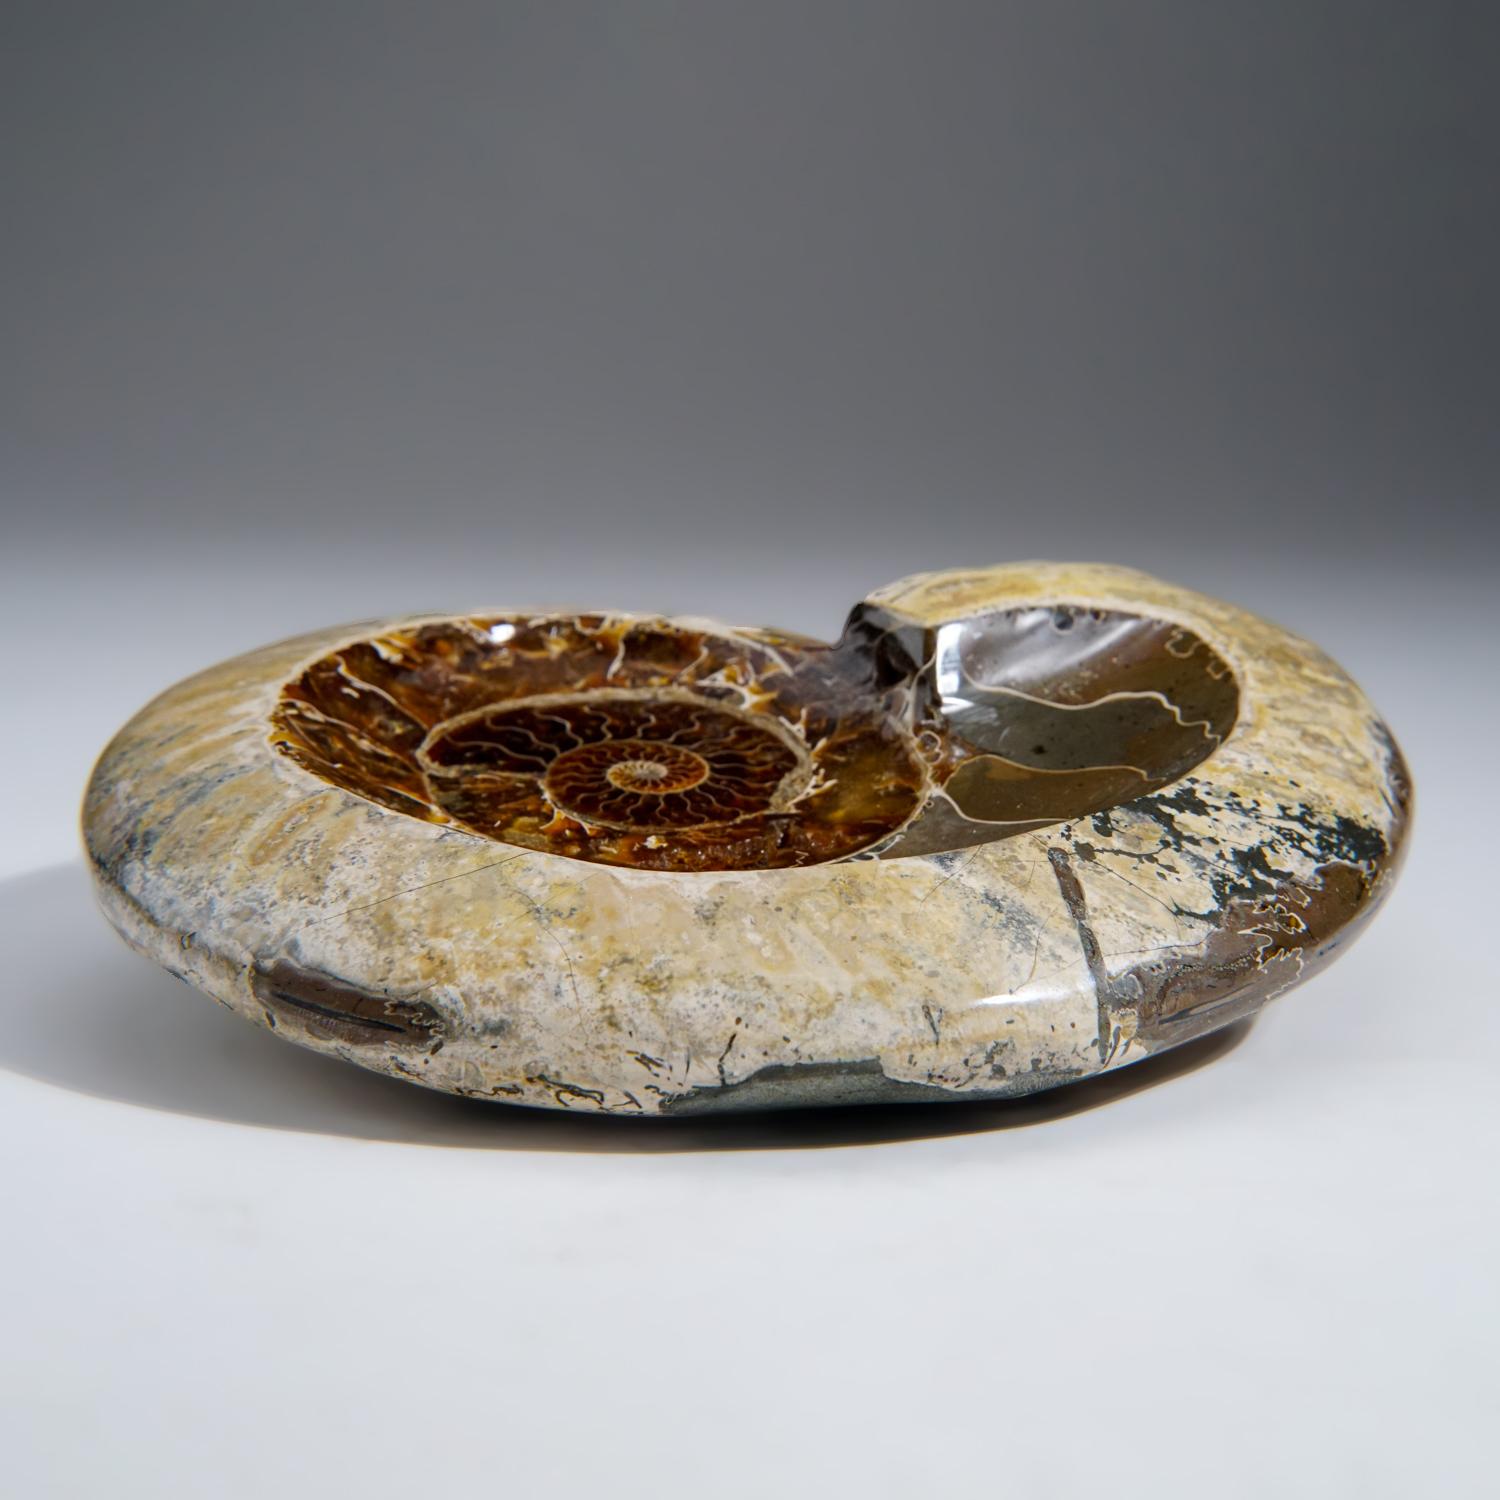 Contemporary Genuine Polished Ammonite Fossil Dish (2.5 lbs)